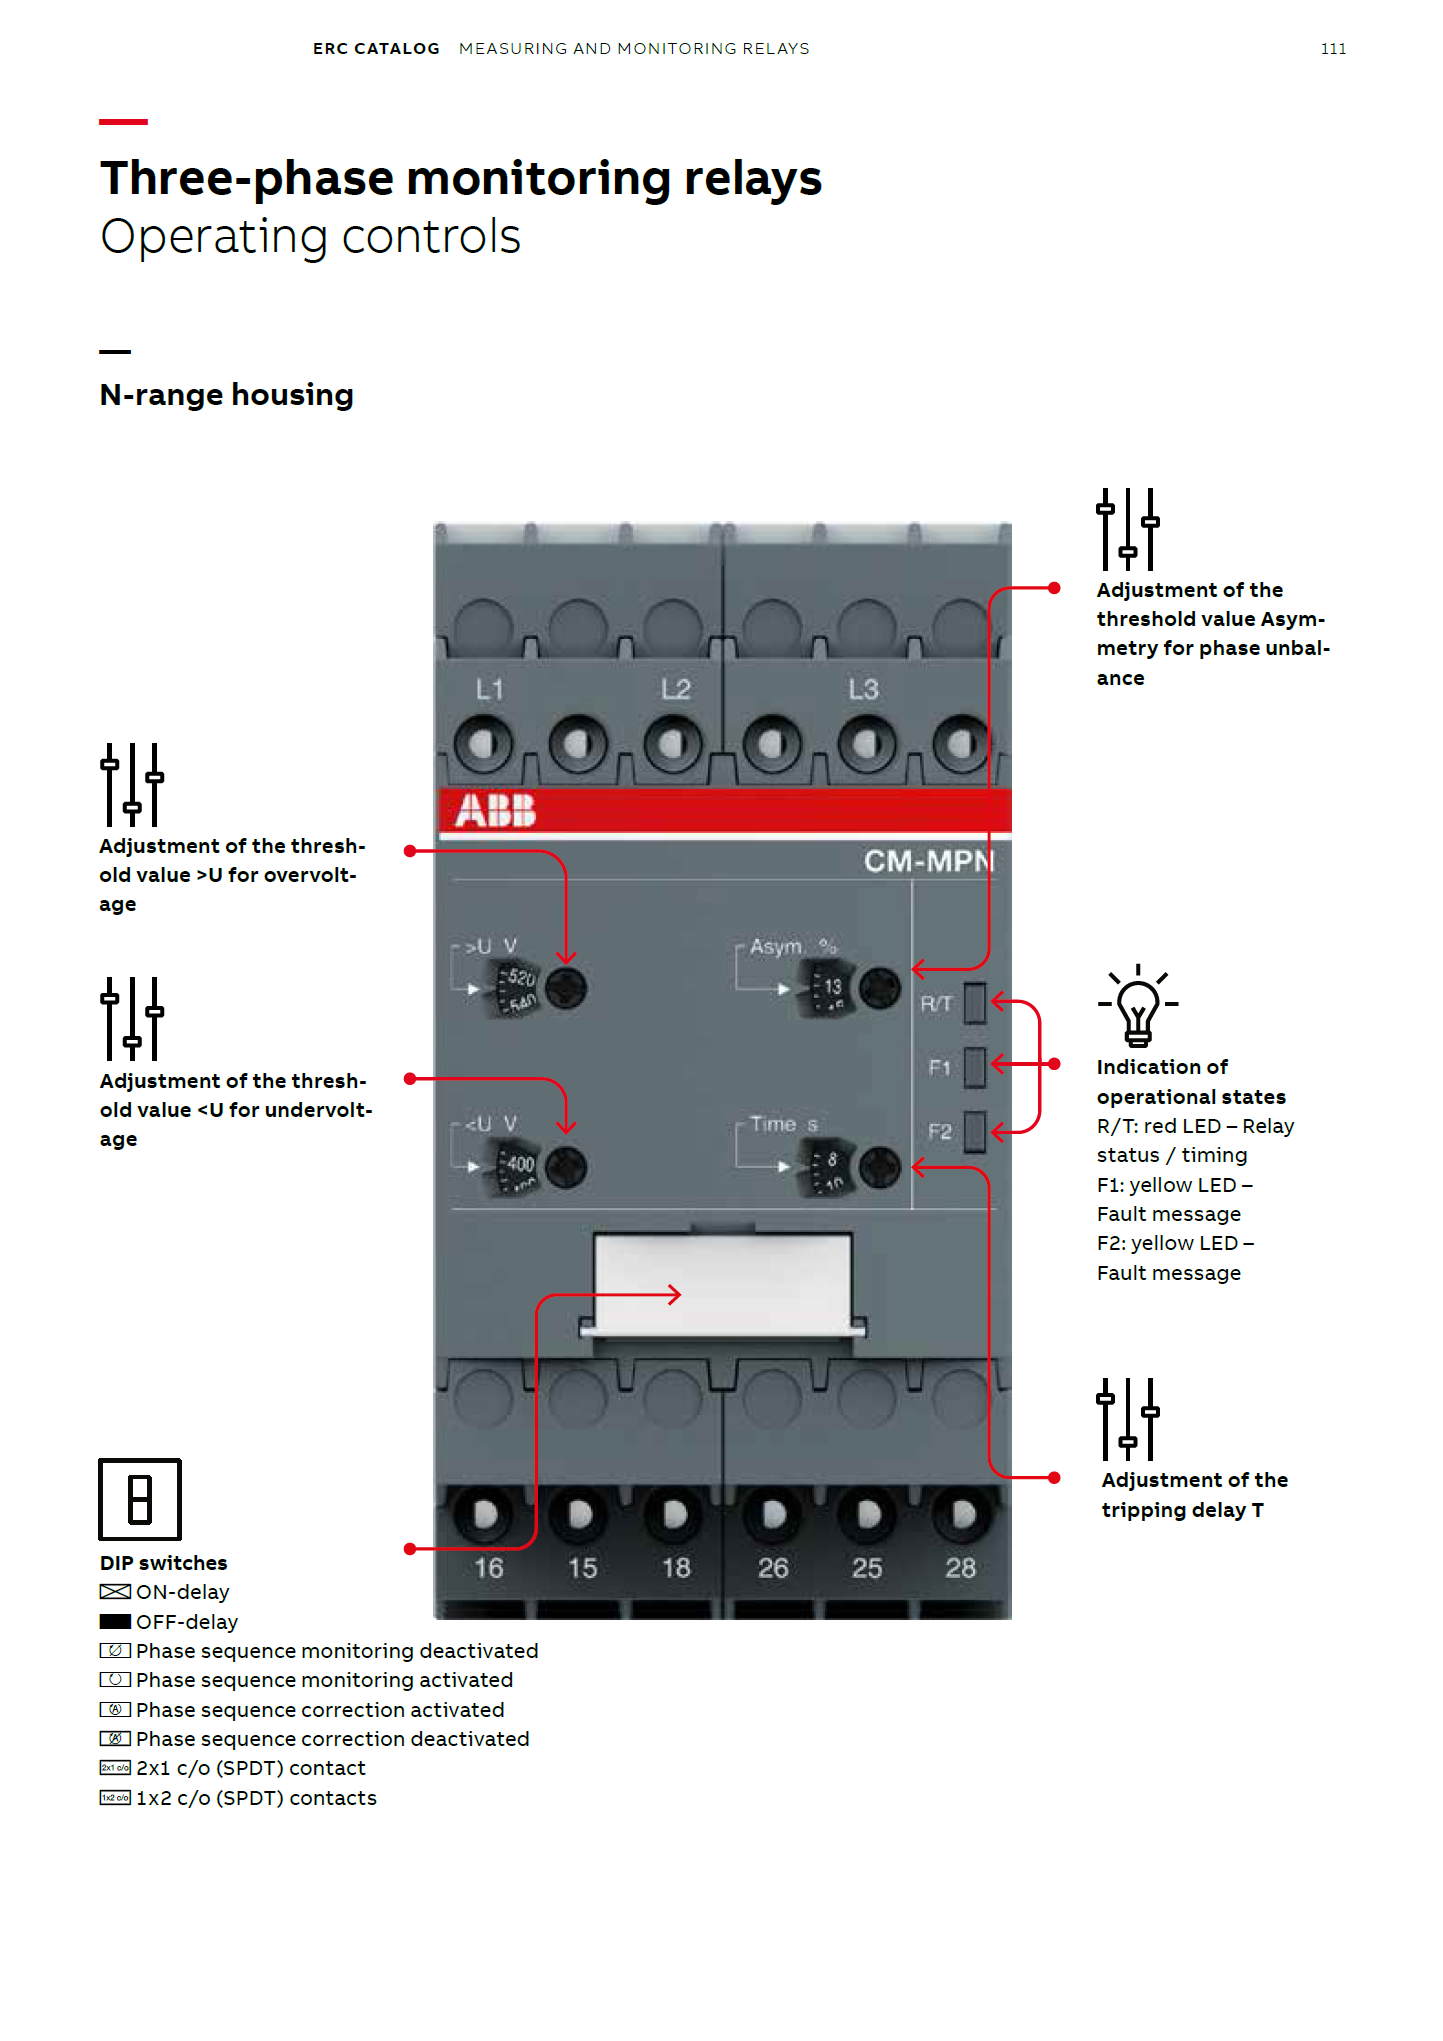 ABB multifunctional three-phase monitoring relays CM-MPS.41S